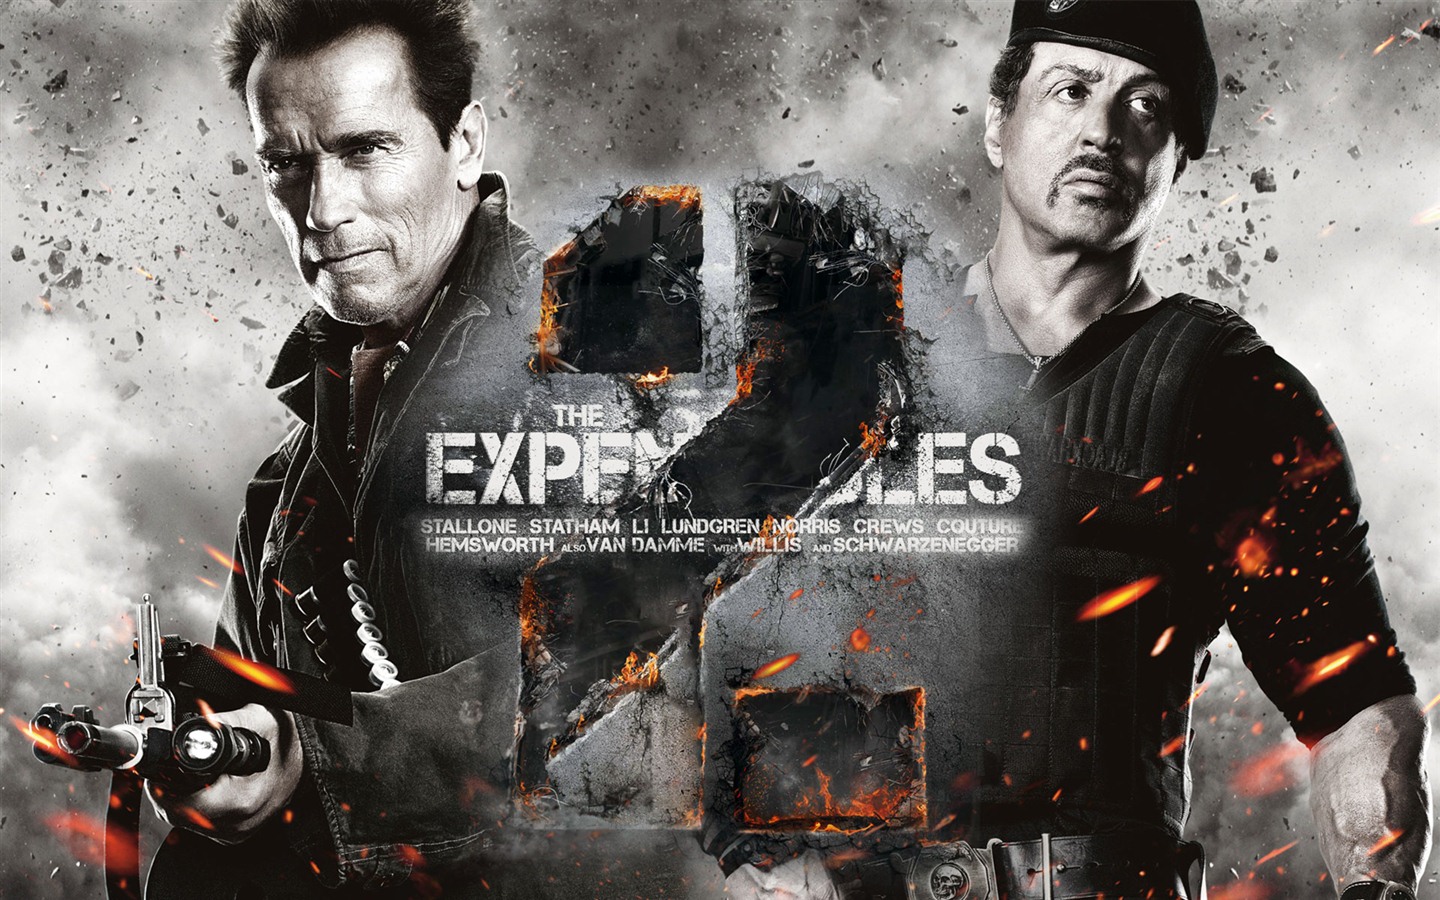 2012 Expendables2 HDの壁紙 #1 - 1440x900